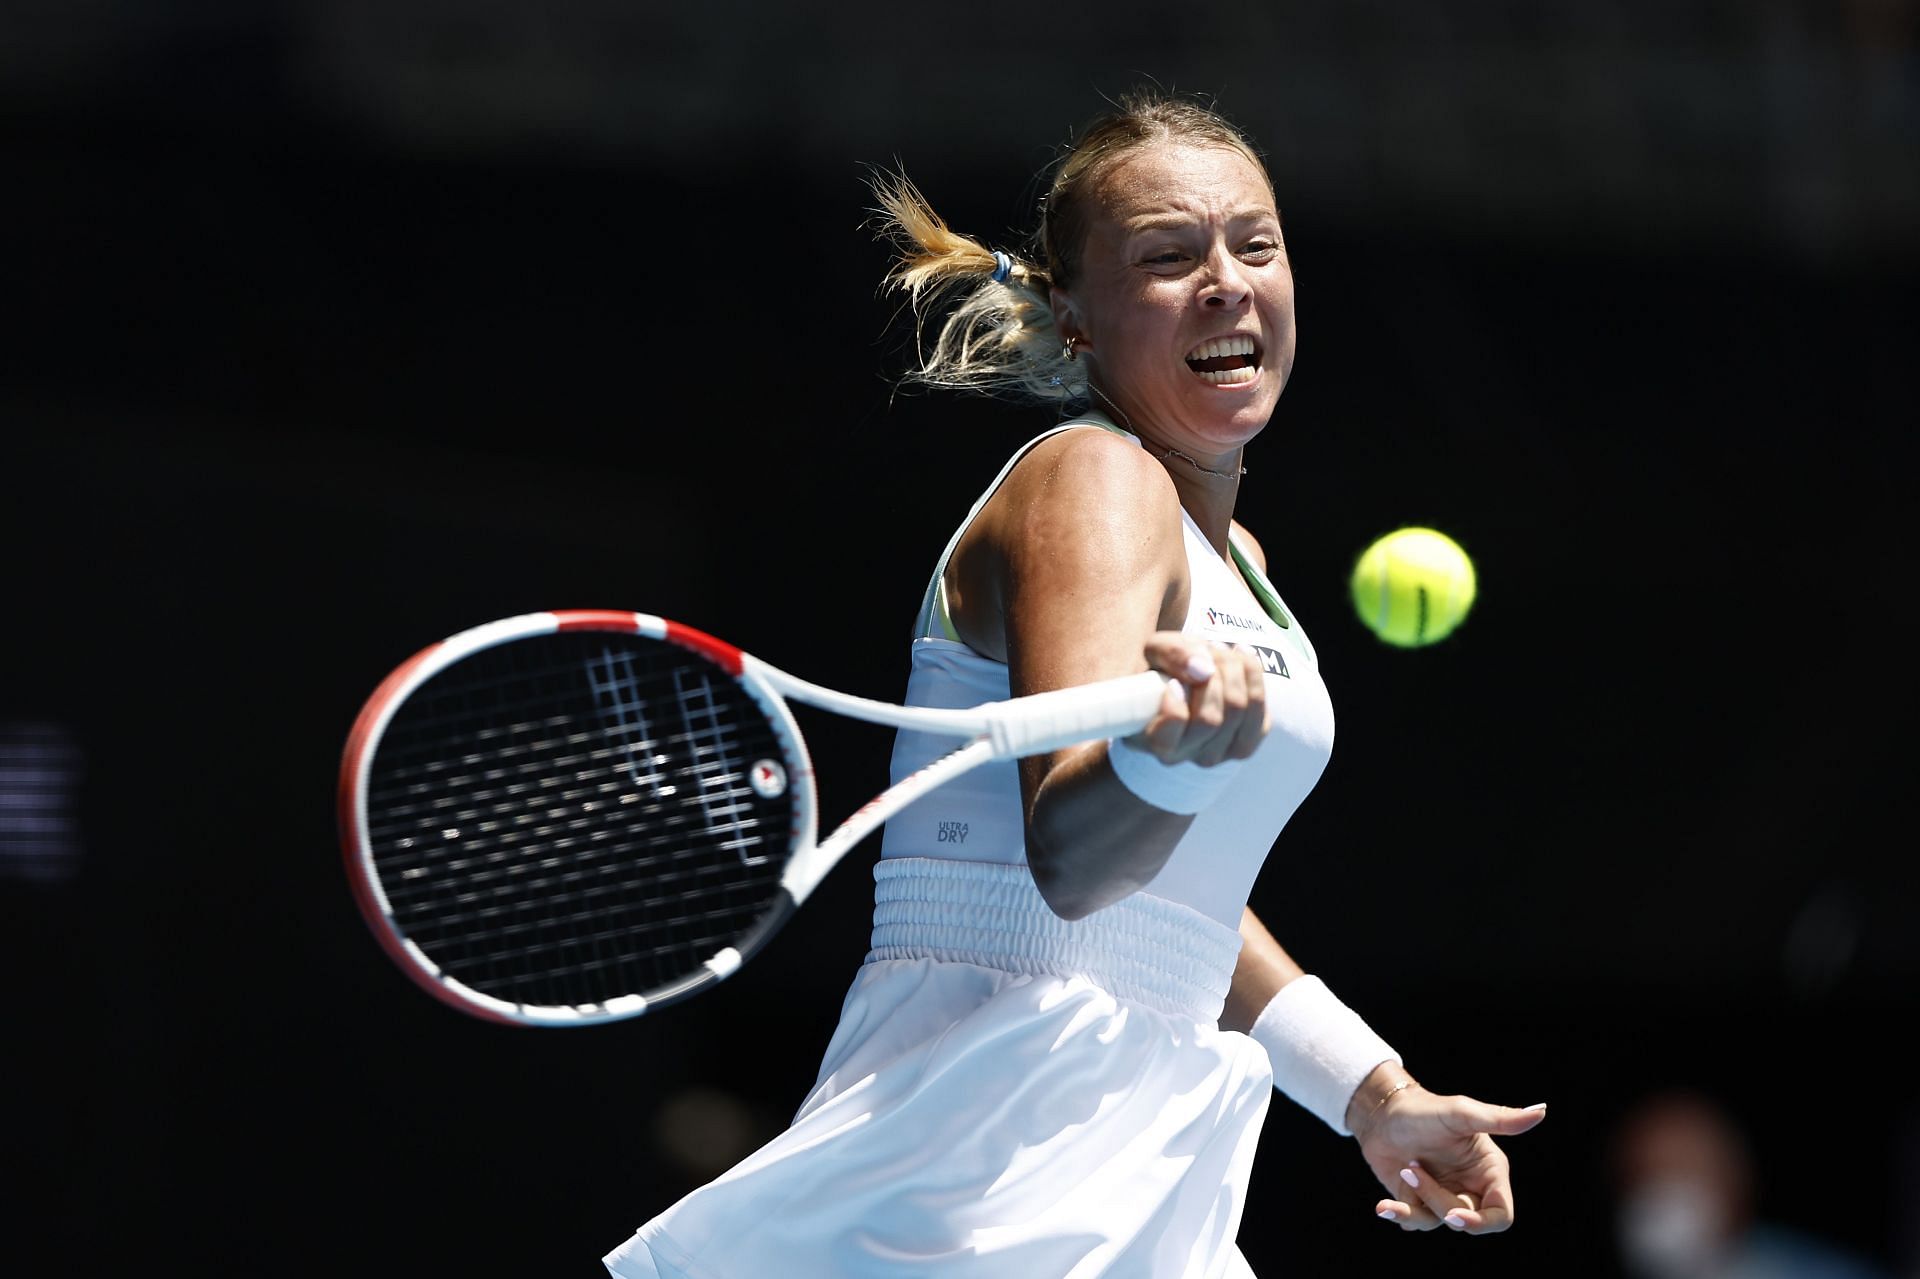 Anett Kontaveit won her first title of the year in St. Petersburg